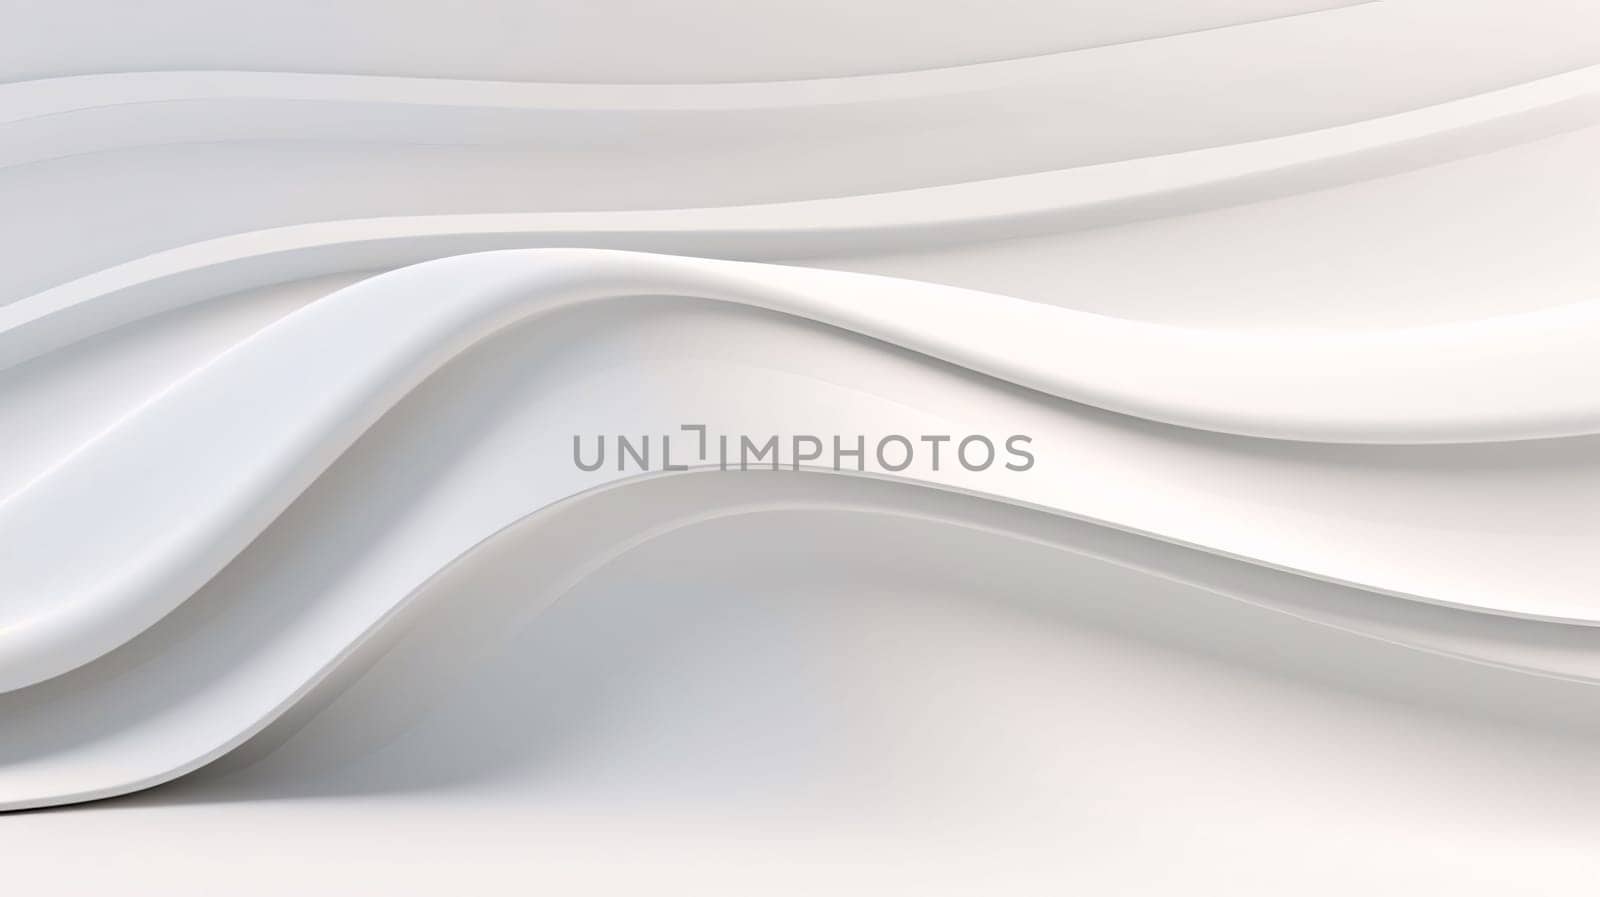 Abstract background design: Abstract white background with smooth lines. 3d rendering, 3d illustration.